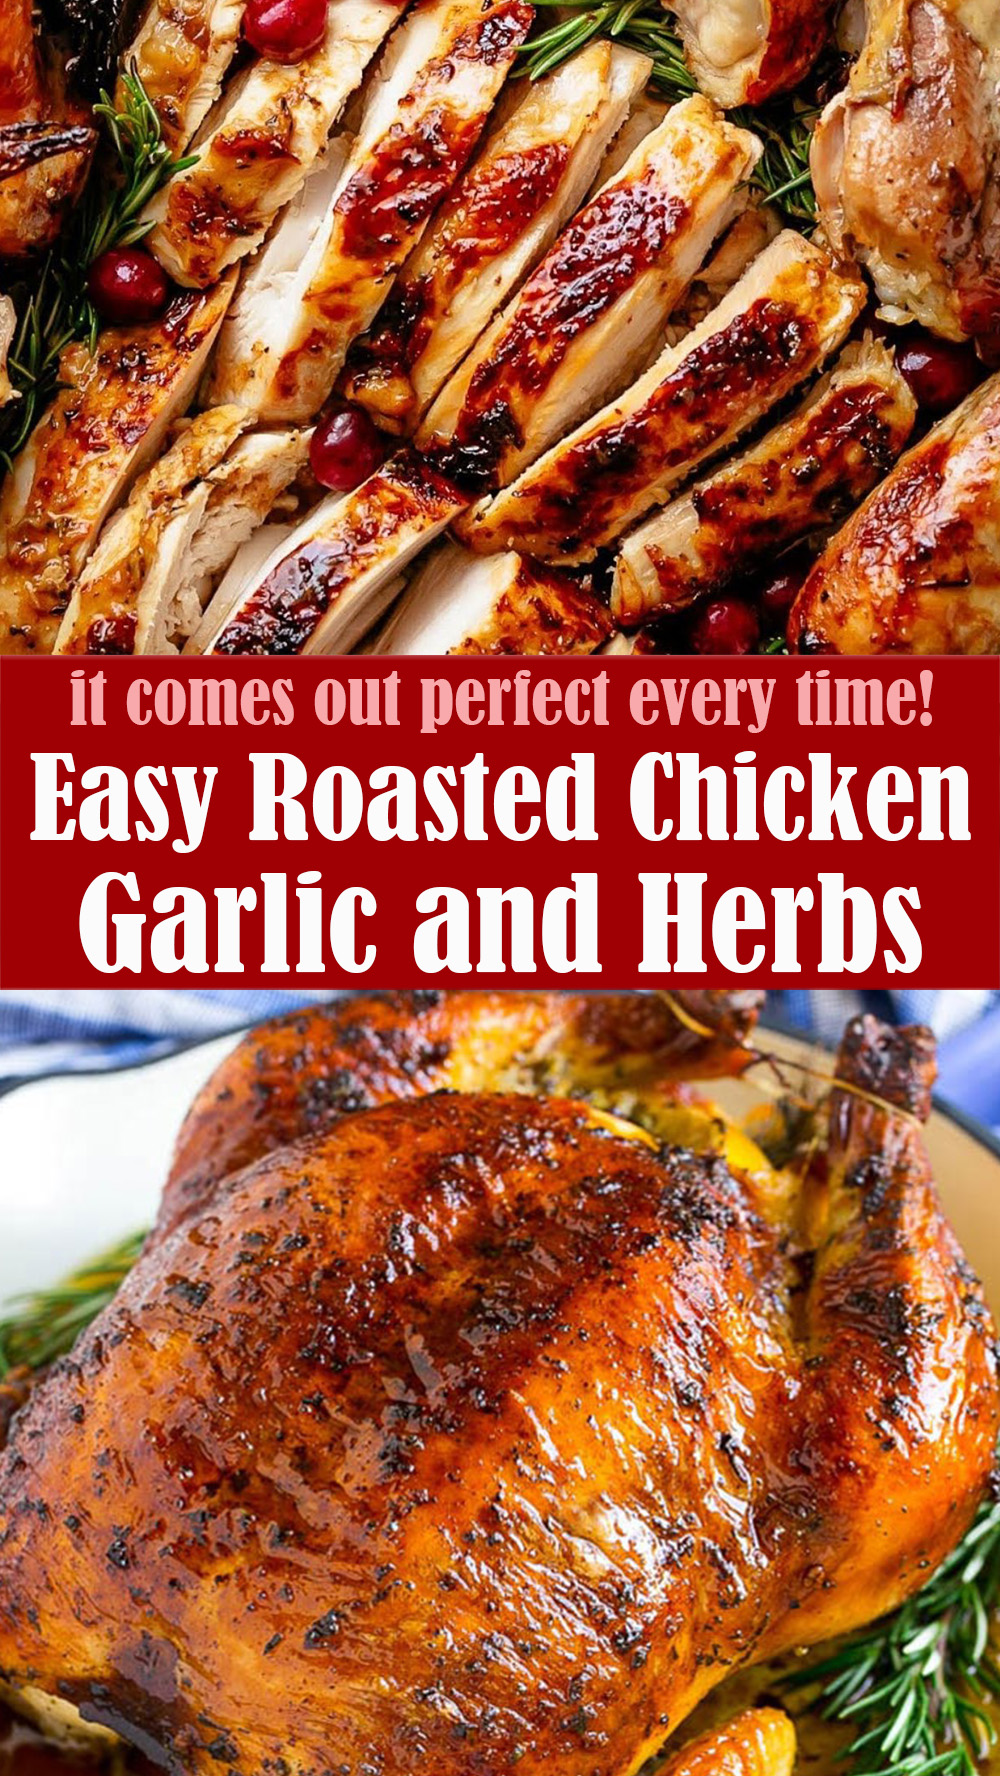 Easy Roasted Chicken with Garlic and Herbs